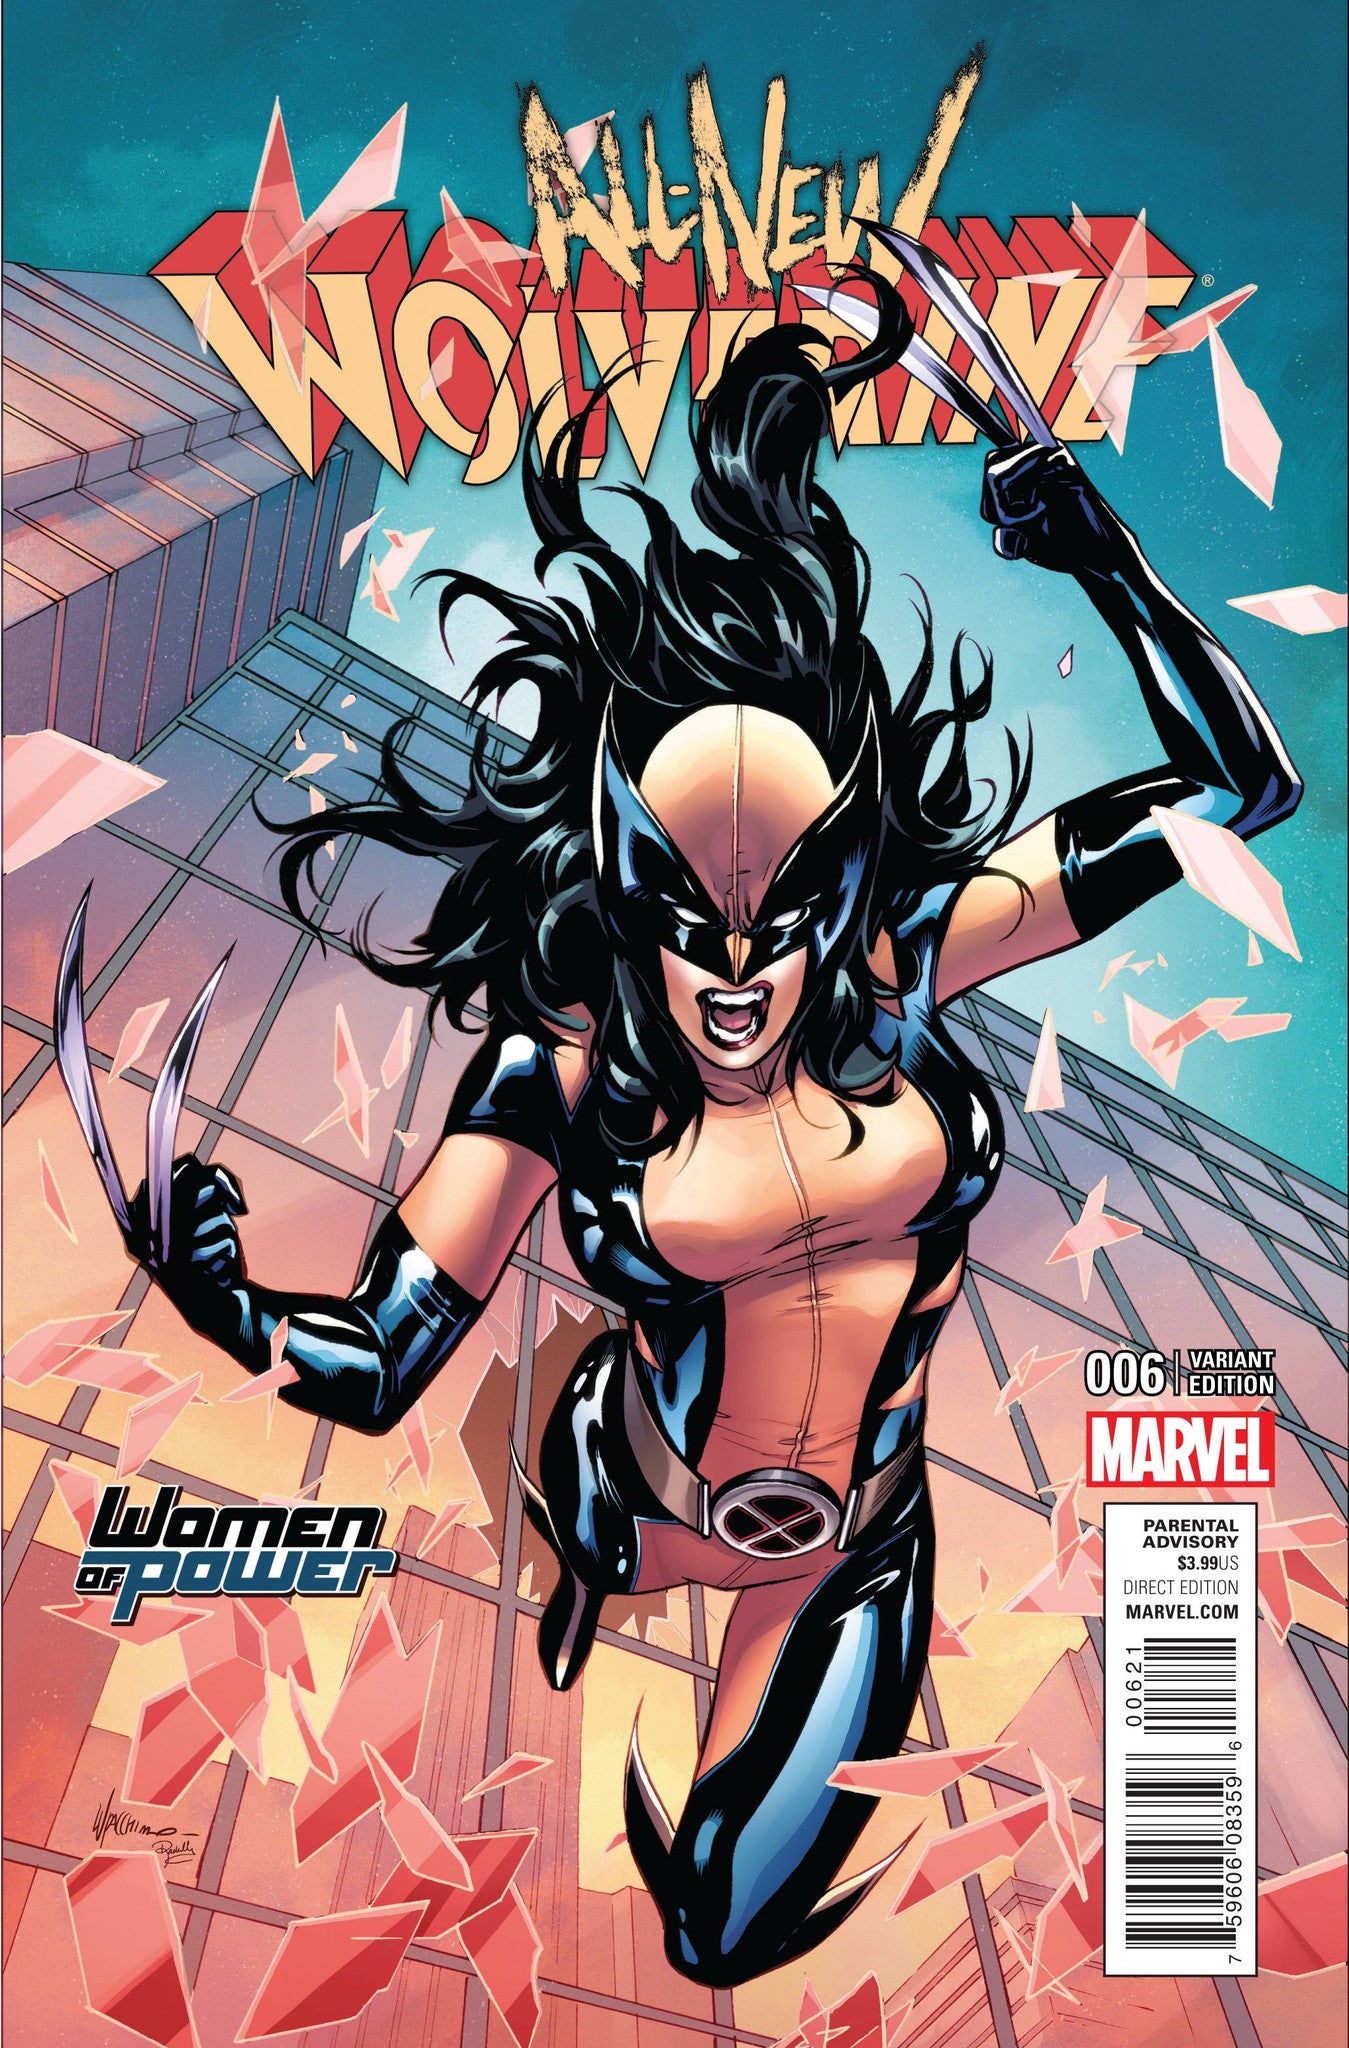 ALL NEW WOLVERINE #6 DEL REY WOP VARIANT COVER